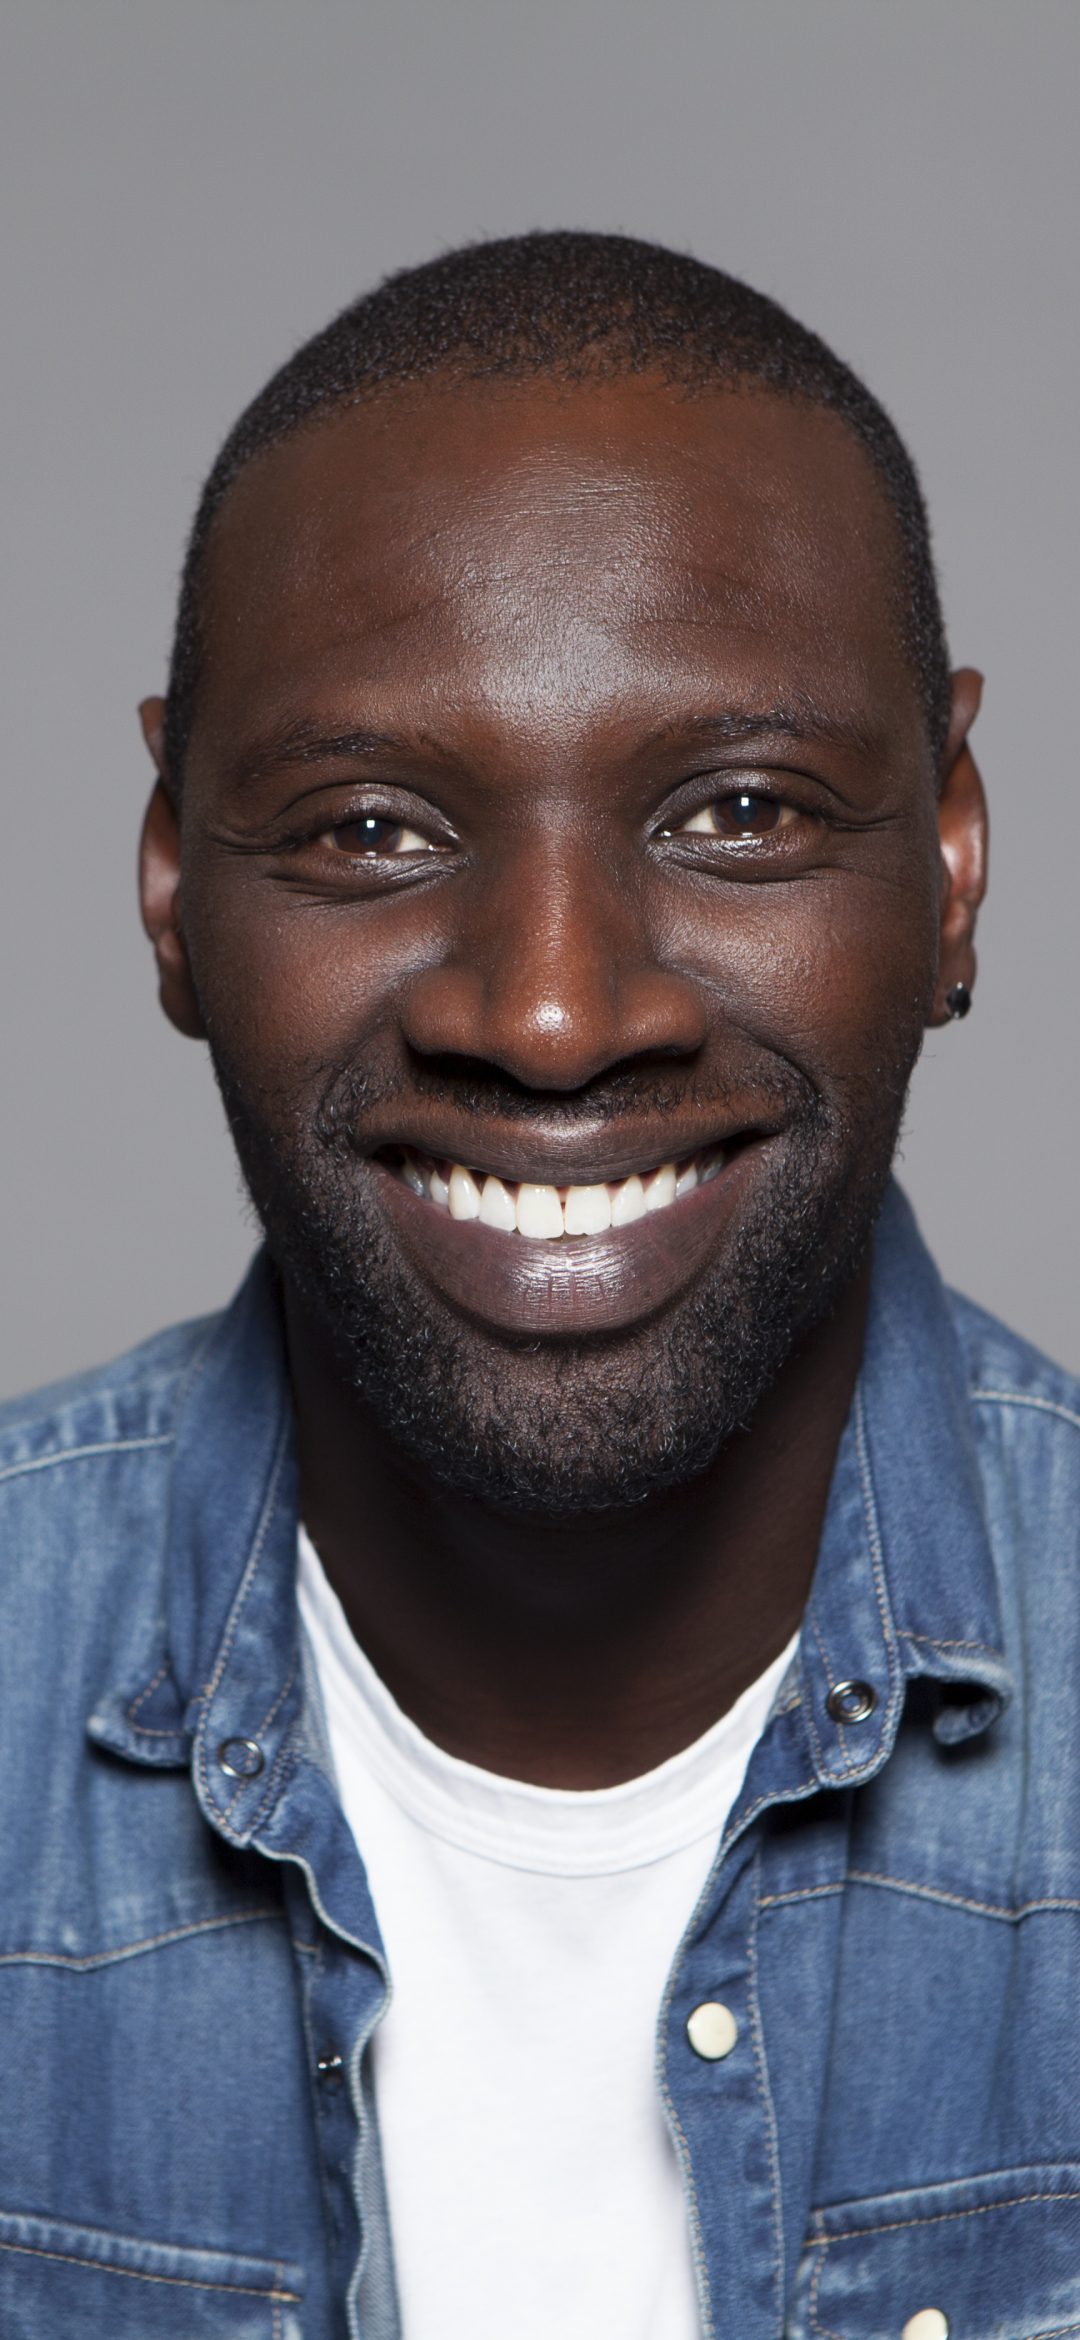 celebrity, omar sy, smile, french, actor